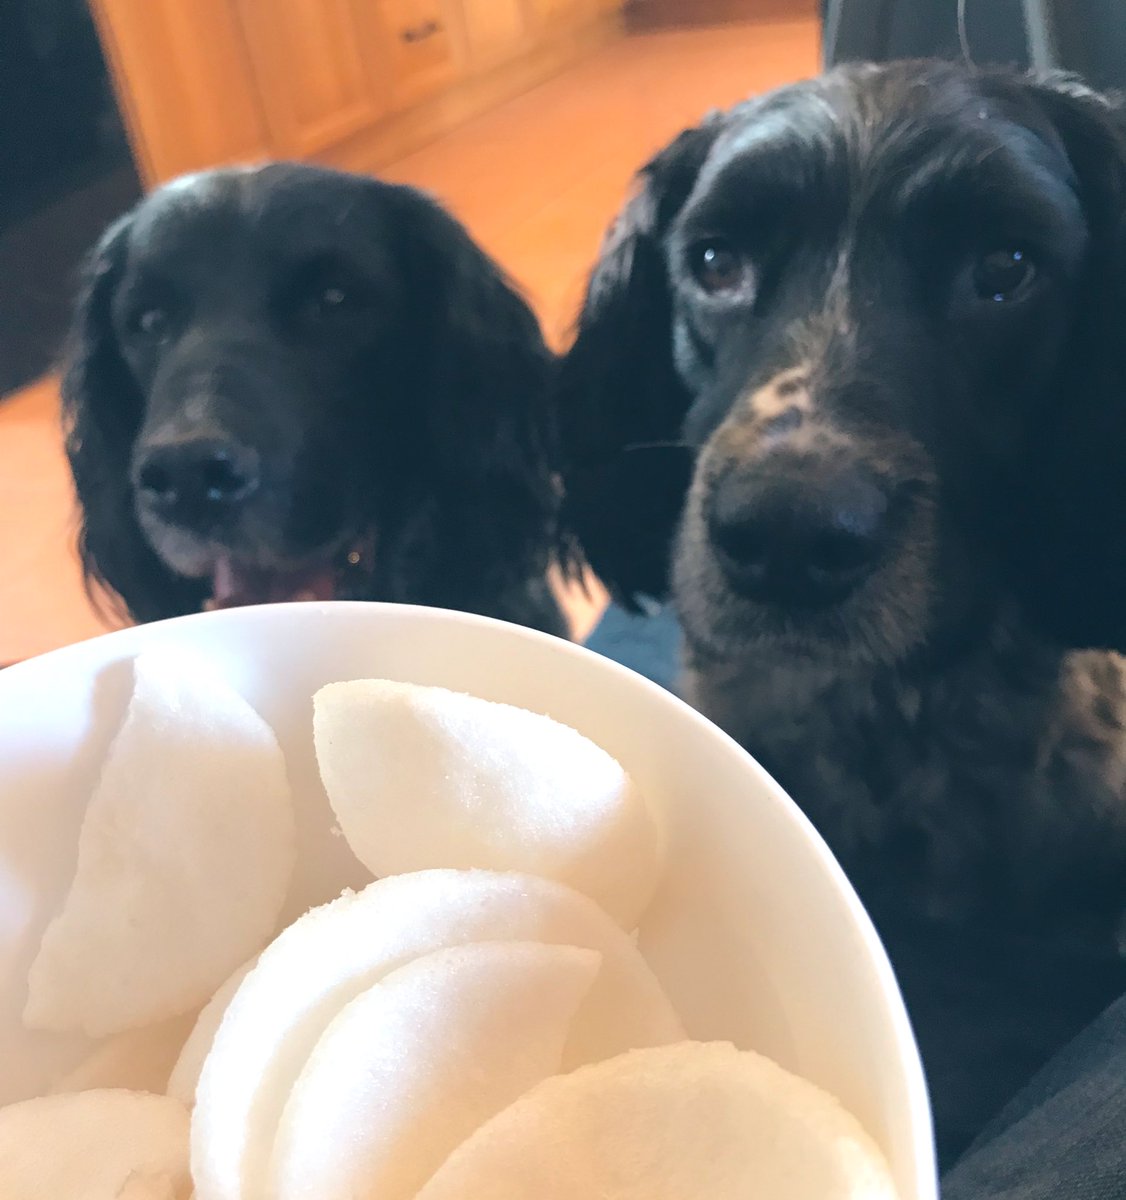 Frens, HuDad has prawn crackers ! We know that we’d like to try them and help
him finish the bowl & save his waistline? 🤣👍#sharsies #publicservice #nortysquad #starvingspannas